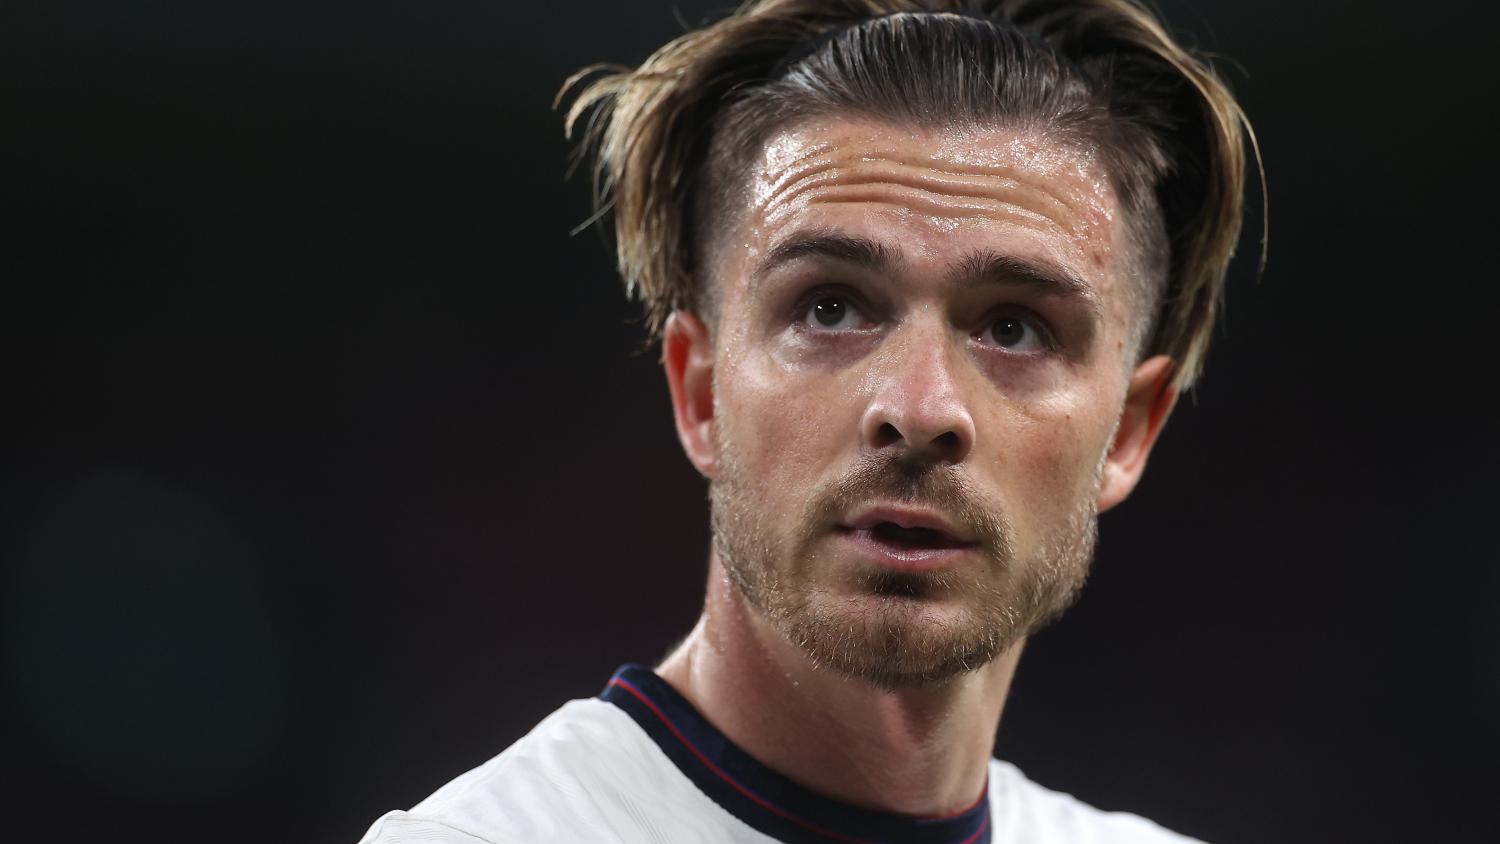 Grealish Set To Be One Of The Most Expensive English Players Ever